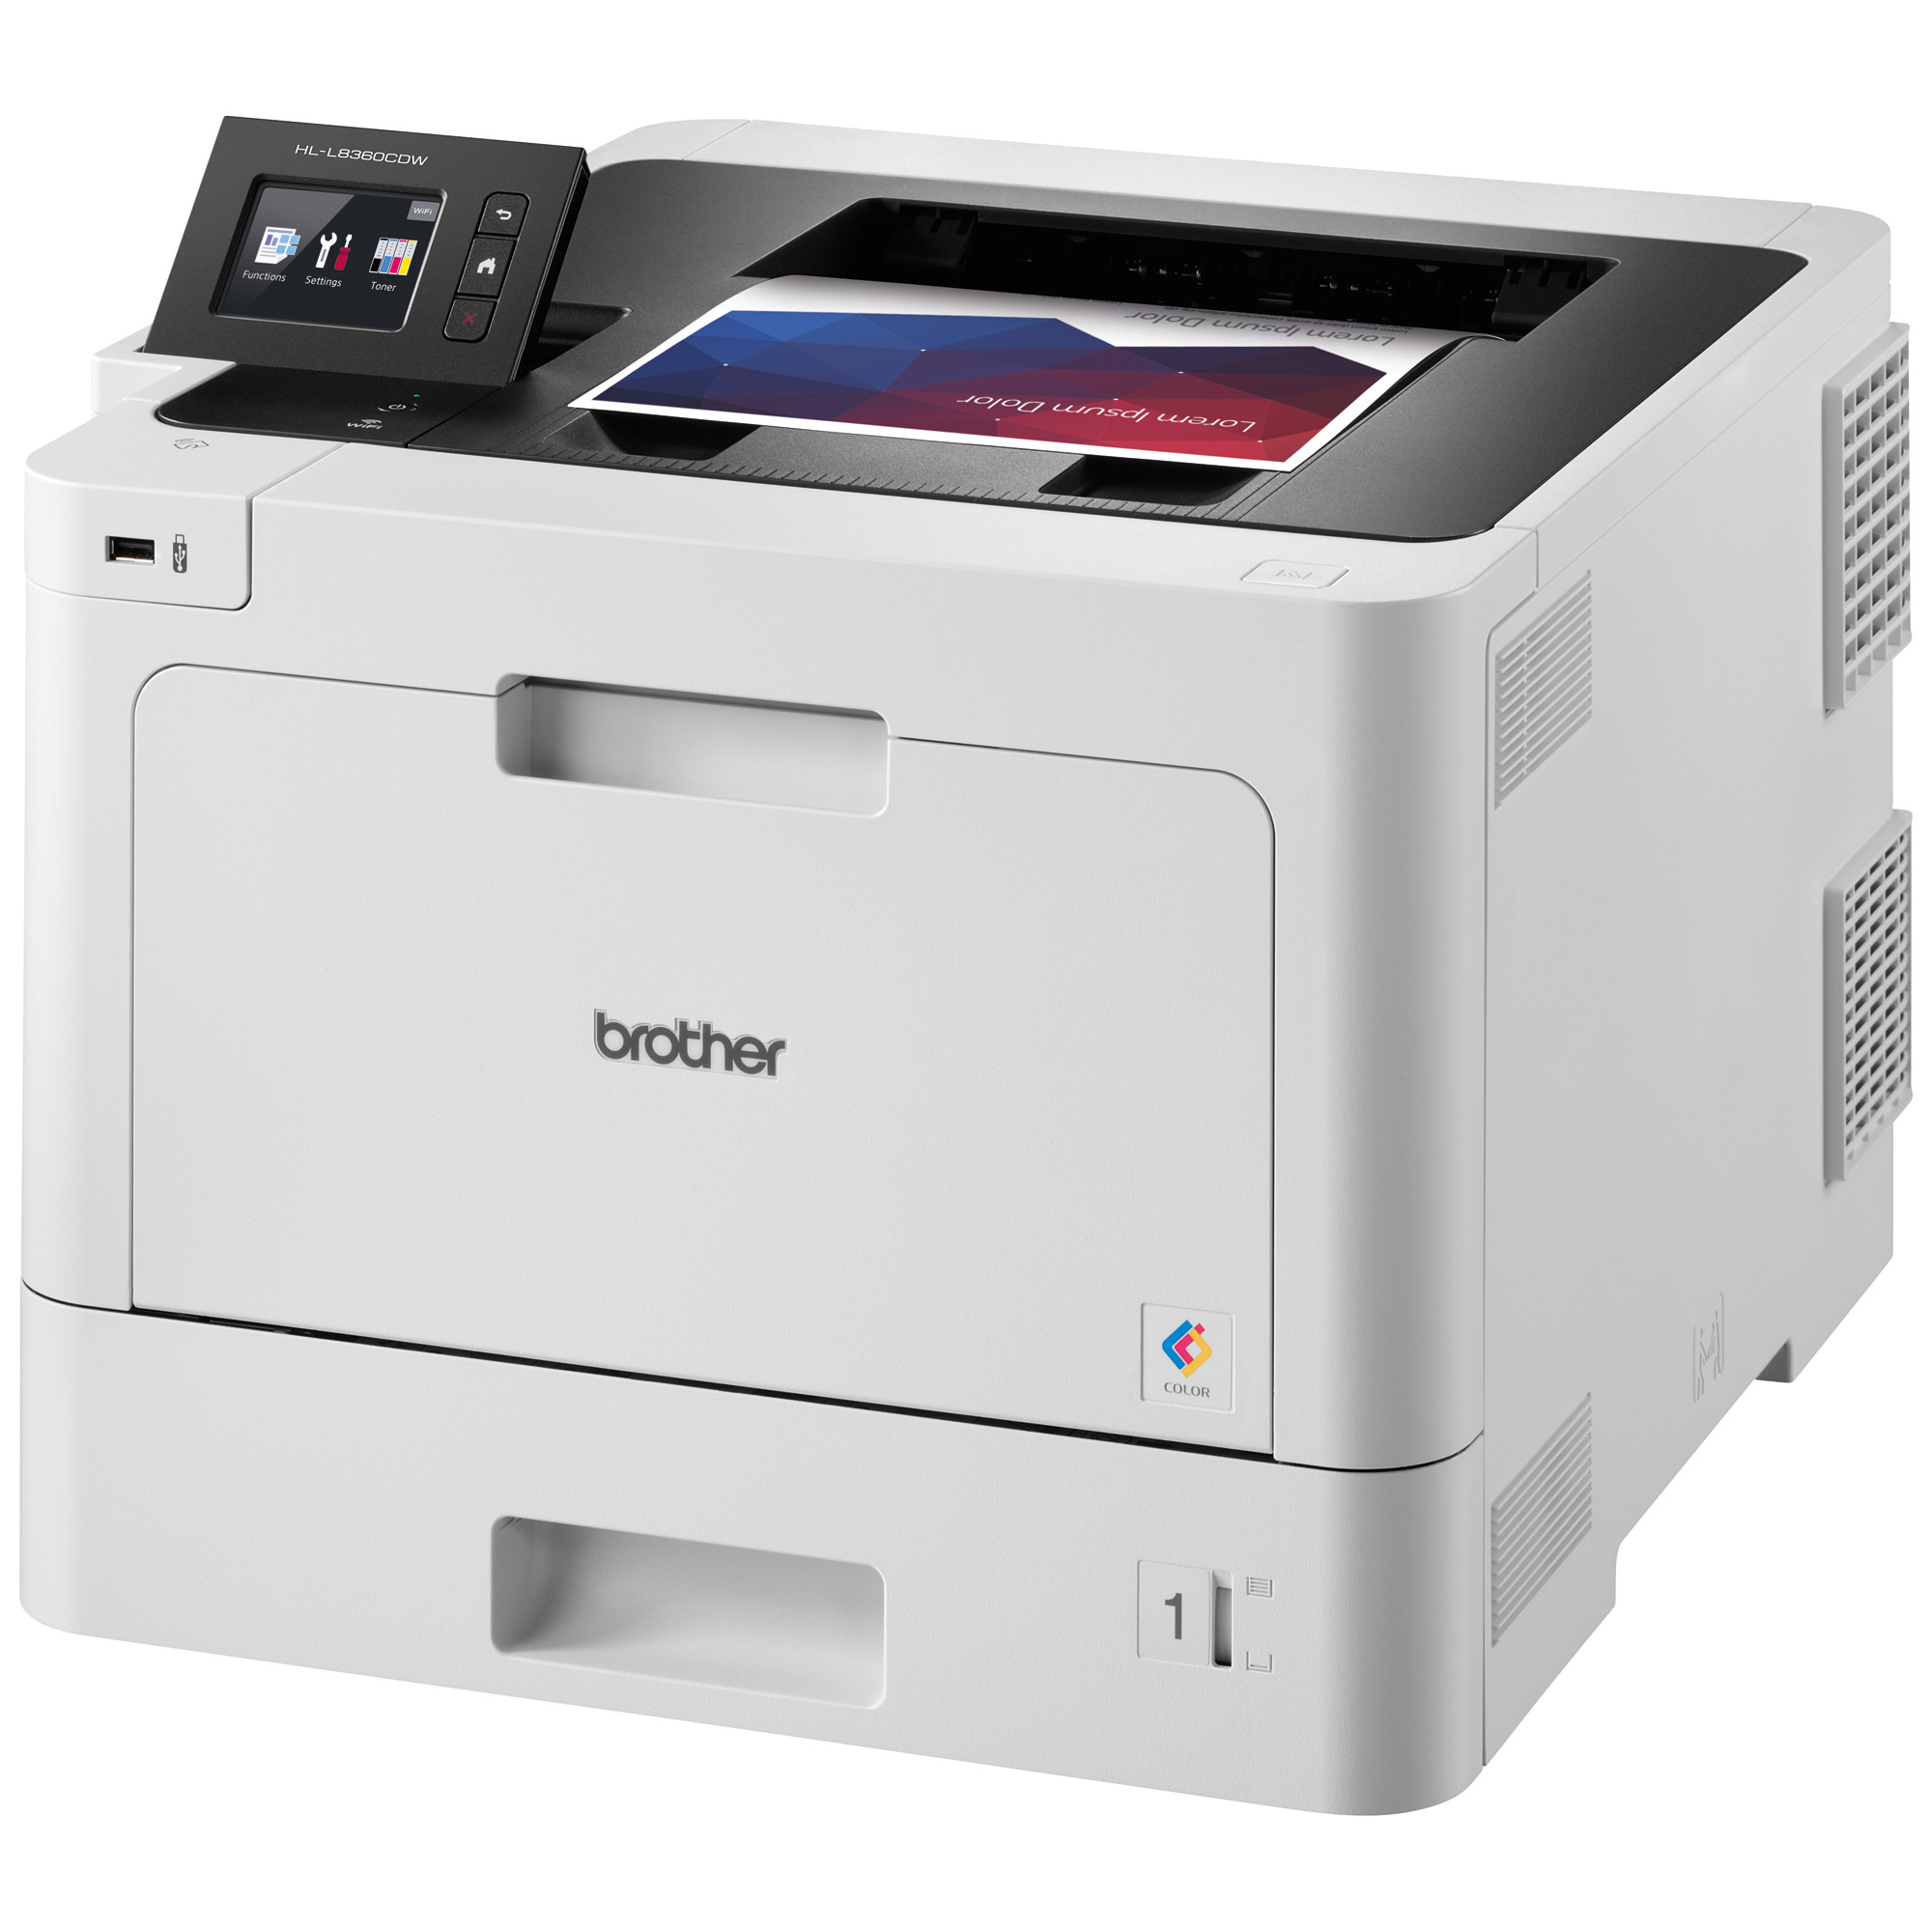 Brother Business Color Laser Printer, HL-L8360CDW, Wireless Networking, Automatic Duplex Printing, Mobile Printing, Cloud printing - image 3 of 10